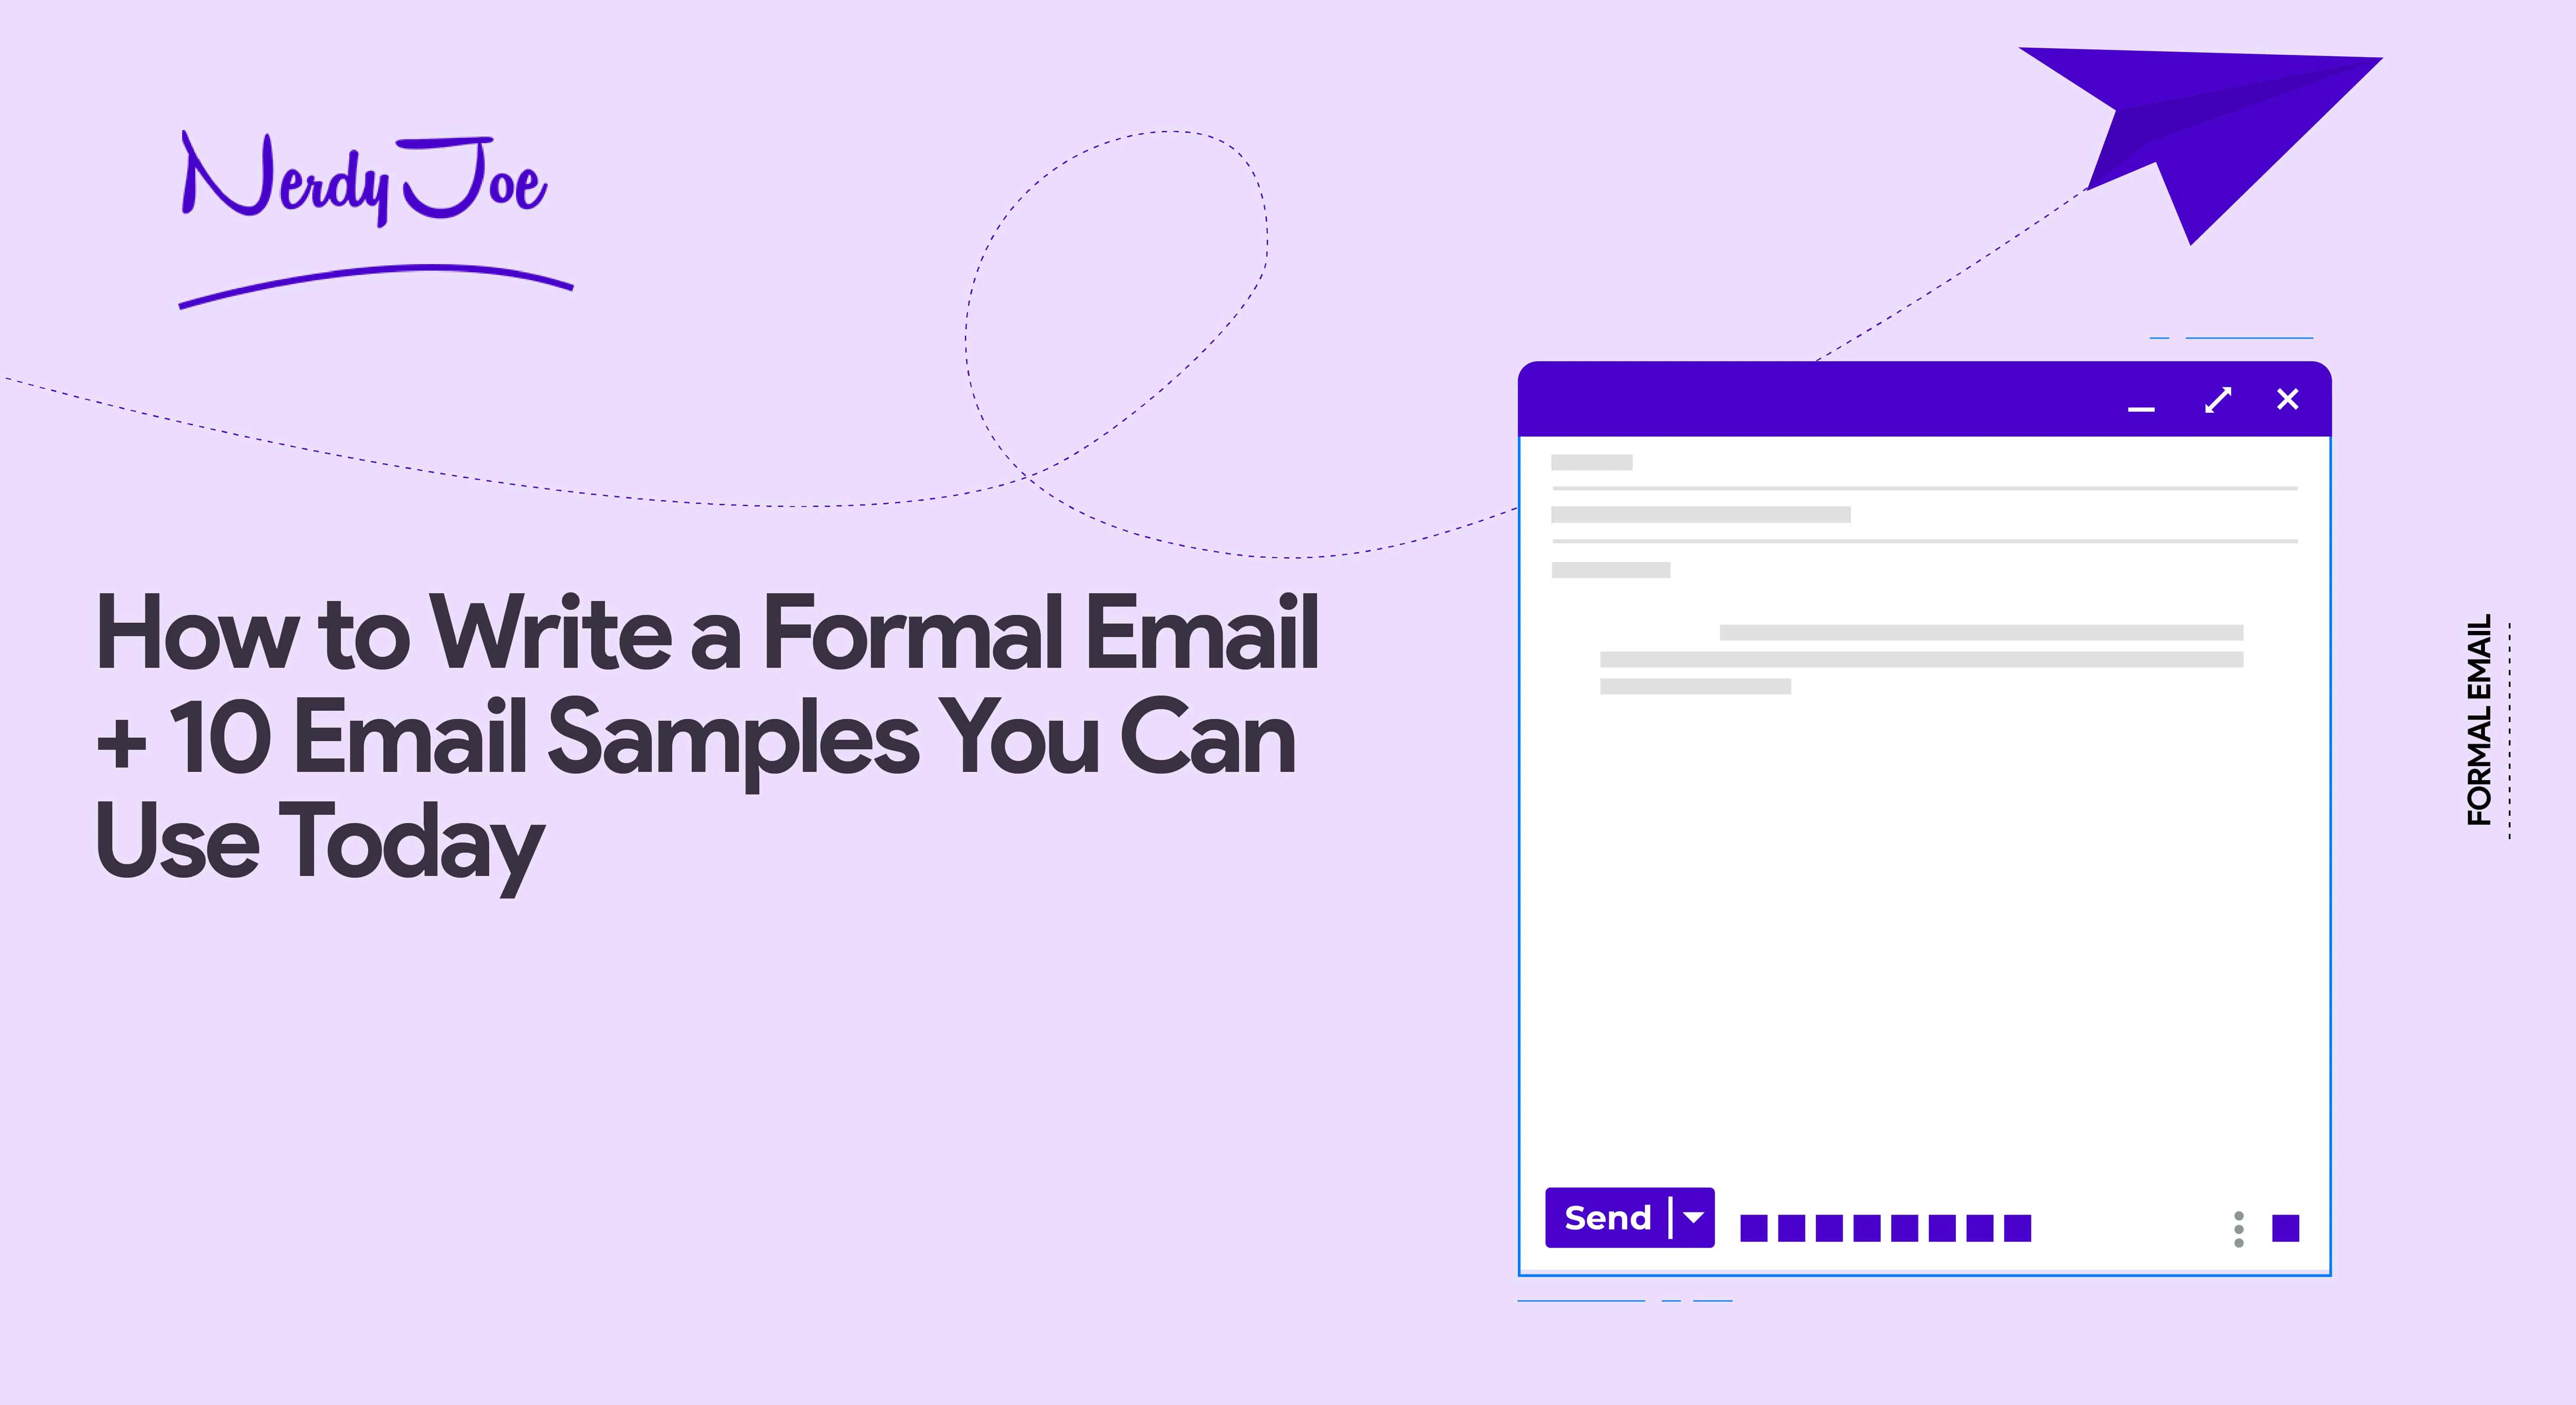 How to Write a Formal Email With 10 Samples